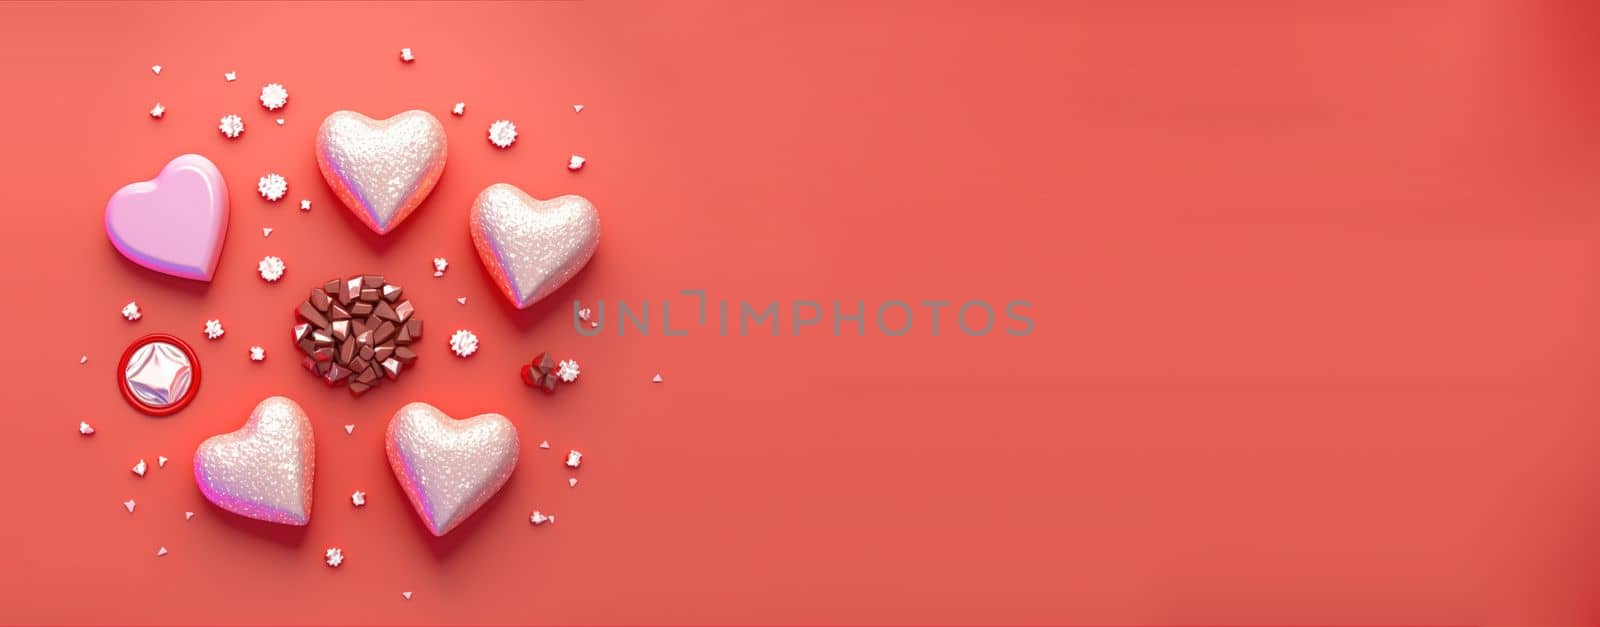 Valentine's Day 3D Illustration of Heart Crystal Diamond for Valentine's Day Promotion Banner and Background by templator